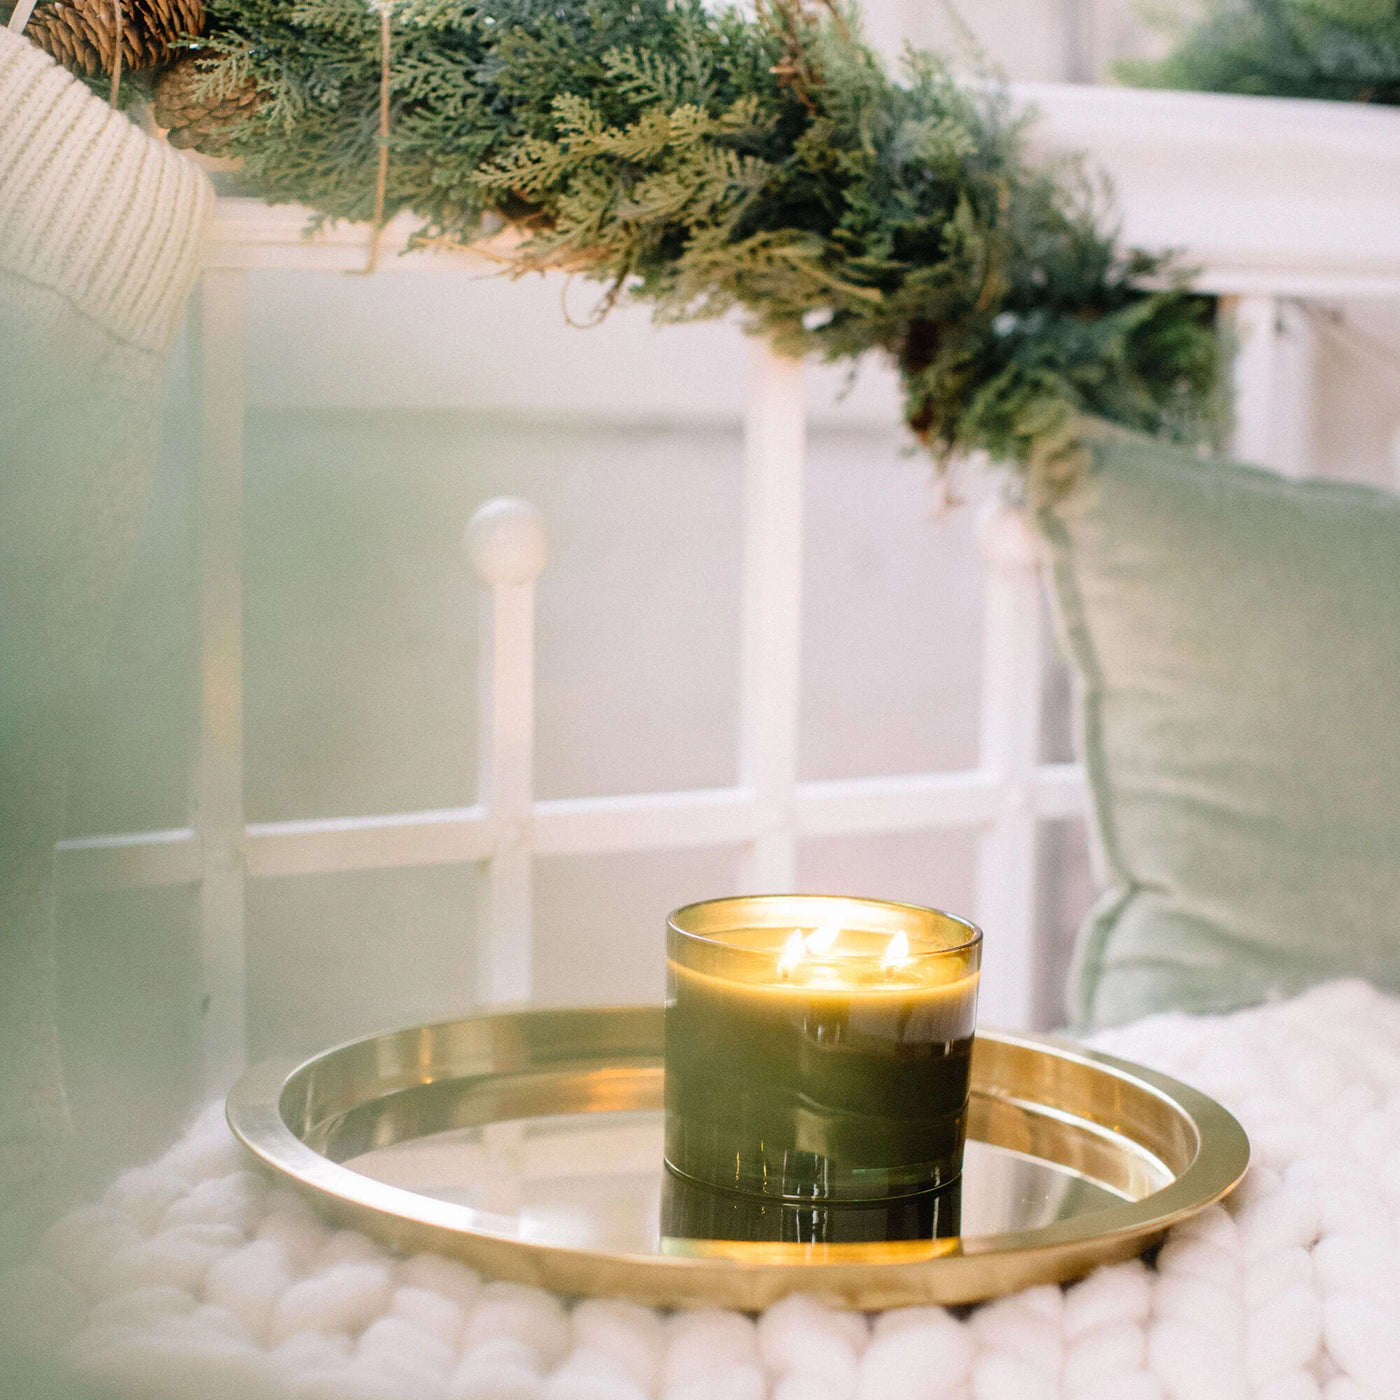 Frasier Fir 3-Wick Candle - Madison's Niche 